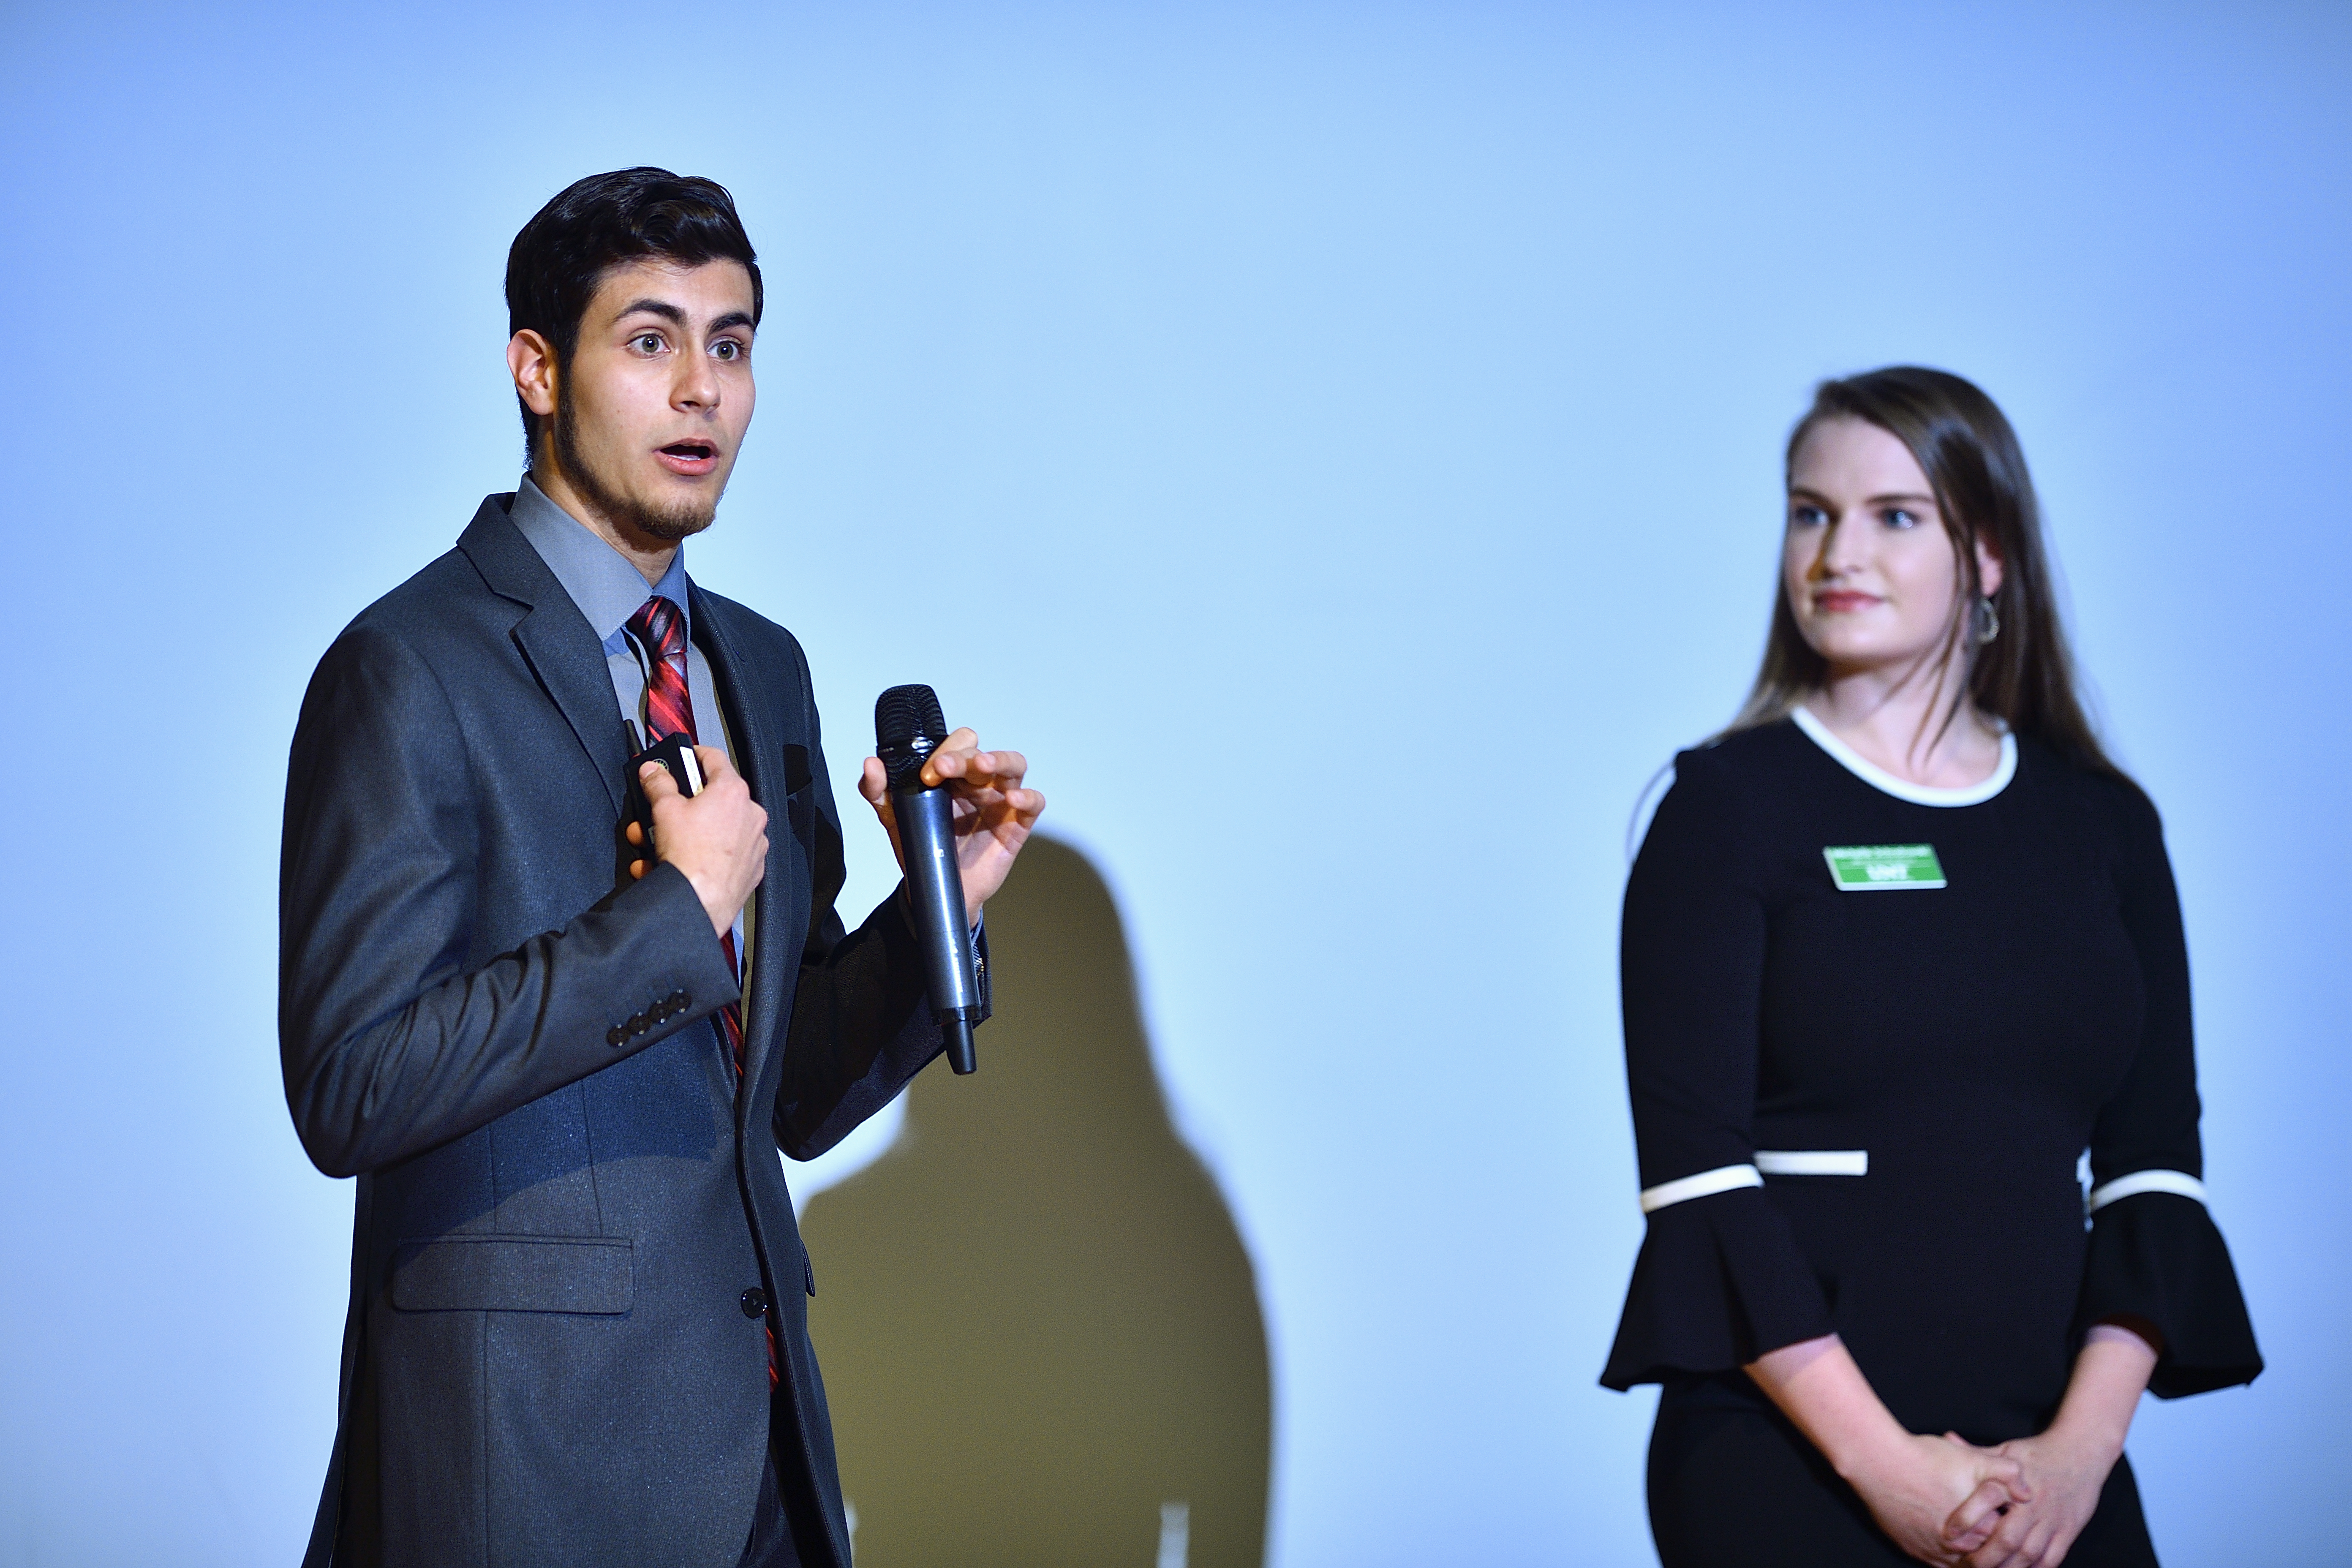 M.B.A. students win $20k in UNT’s first Ed Tech Ascend pitch competition